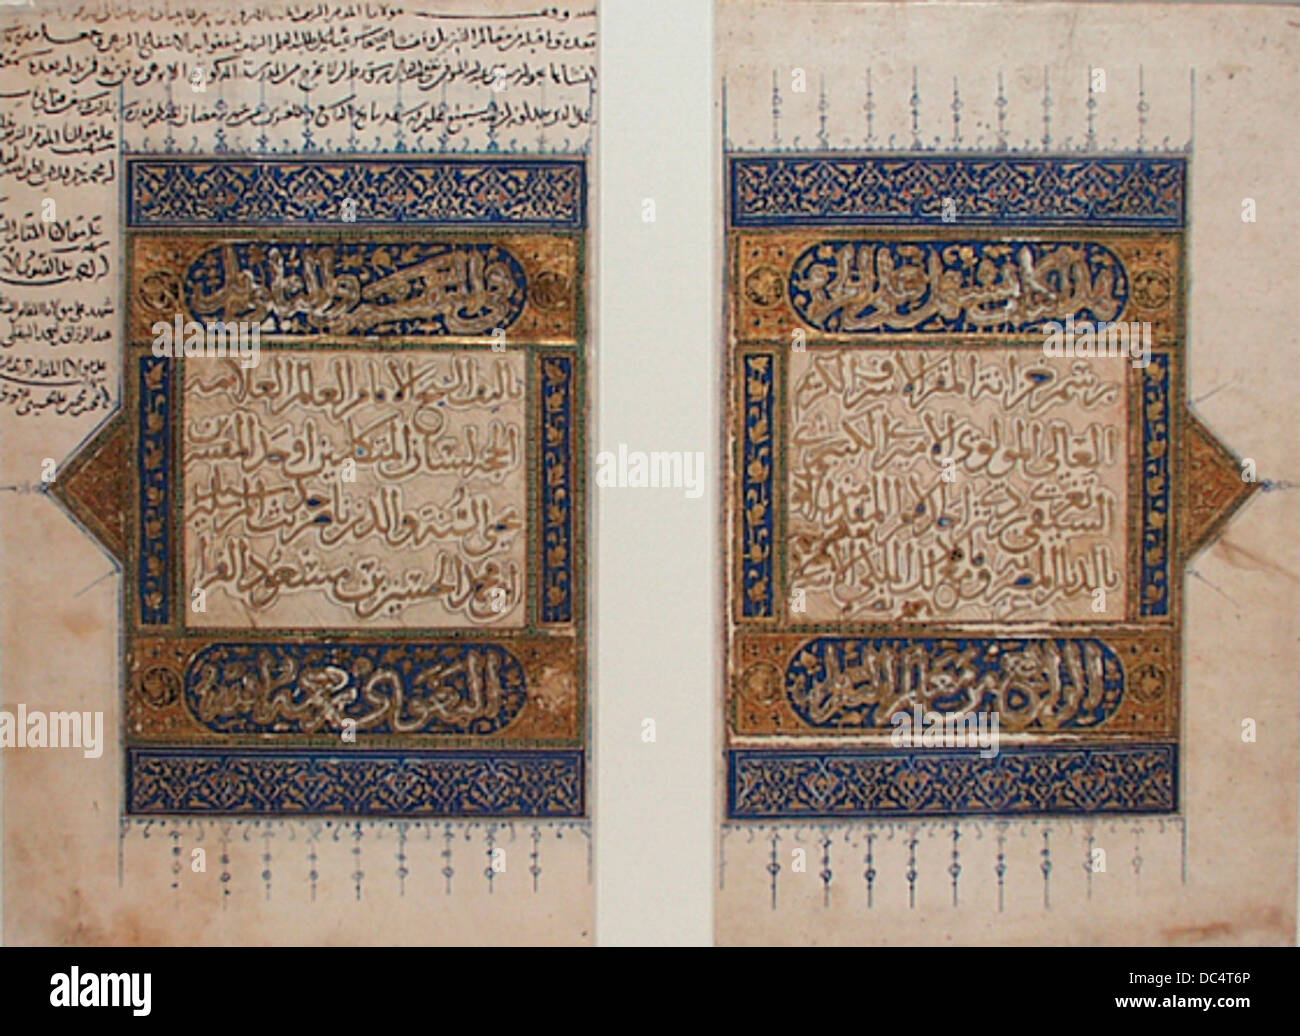 Double Page Illuminated Frontispiece to a Qur'anic Commentary (Tafsir) M.73.5.531 Stock Photo